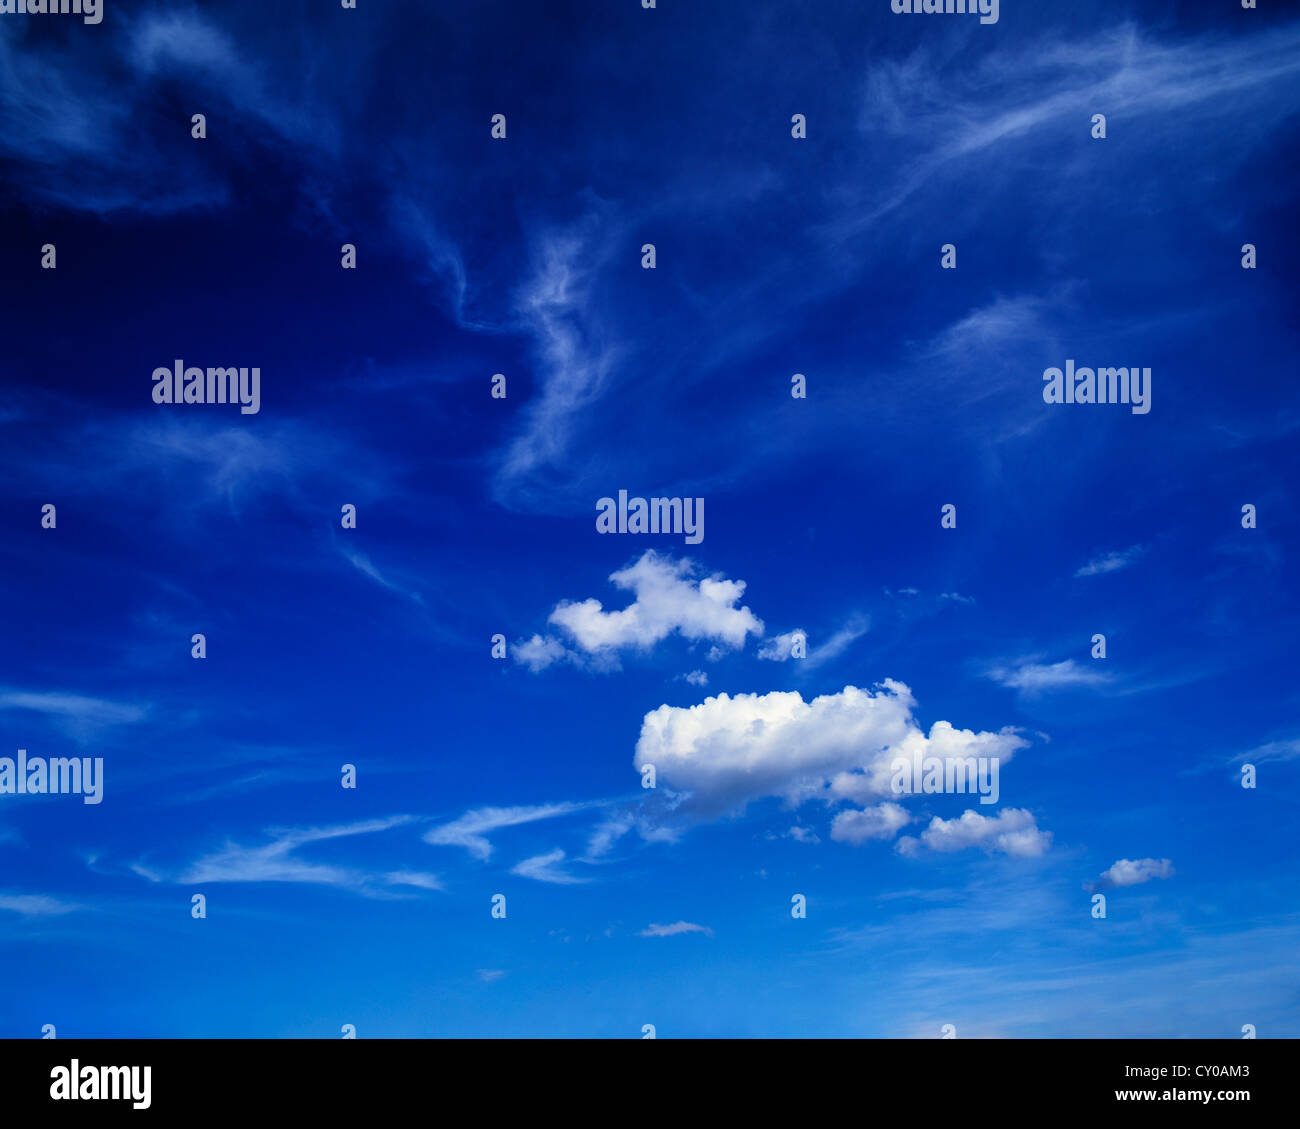 Fair weather, blue sky with cirrus and cumulus clouds Stock Photo